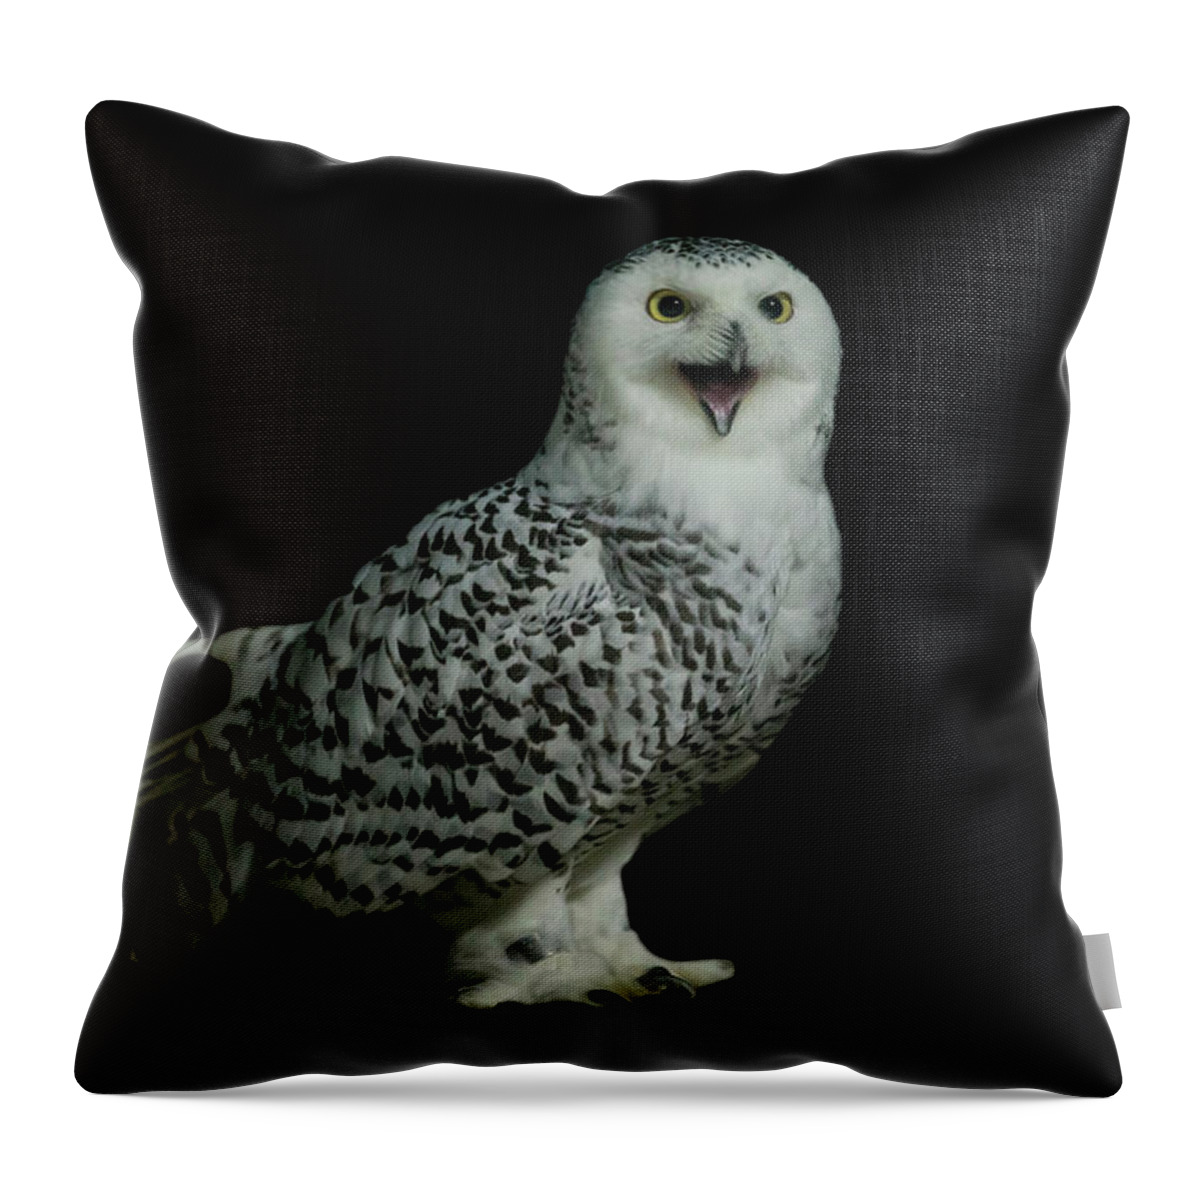 Animal Themes Throw Pillow featuring the photograph Snowy Owl by Manoj Shah